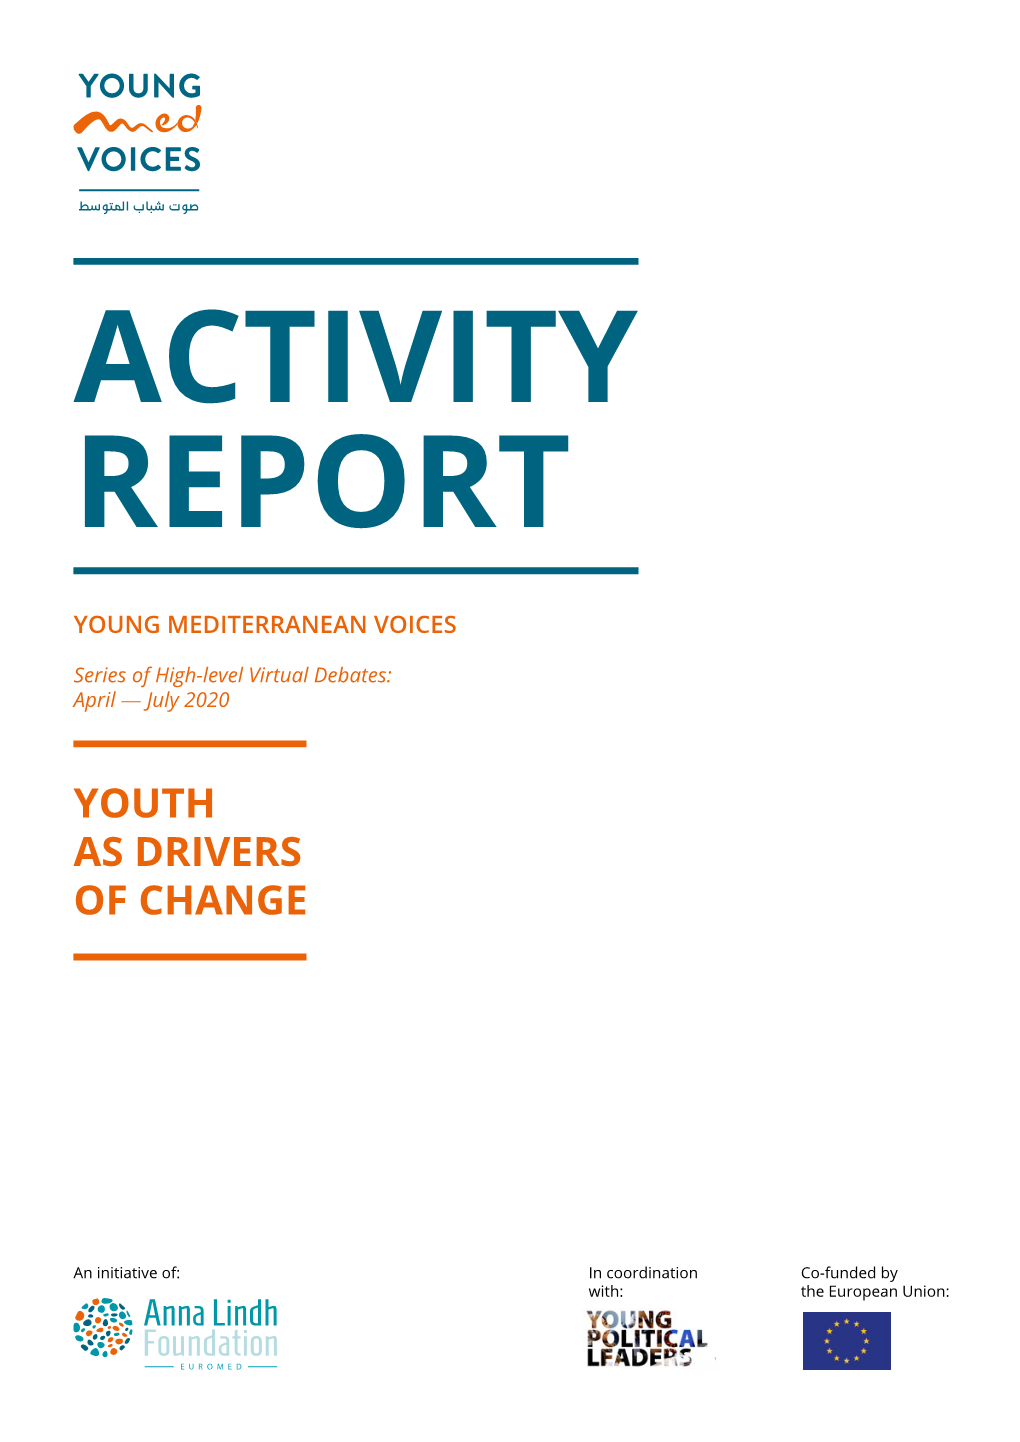 Read the Recetly Launched Activity Report!